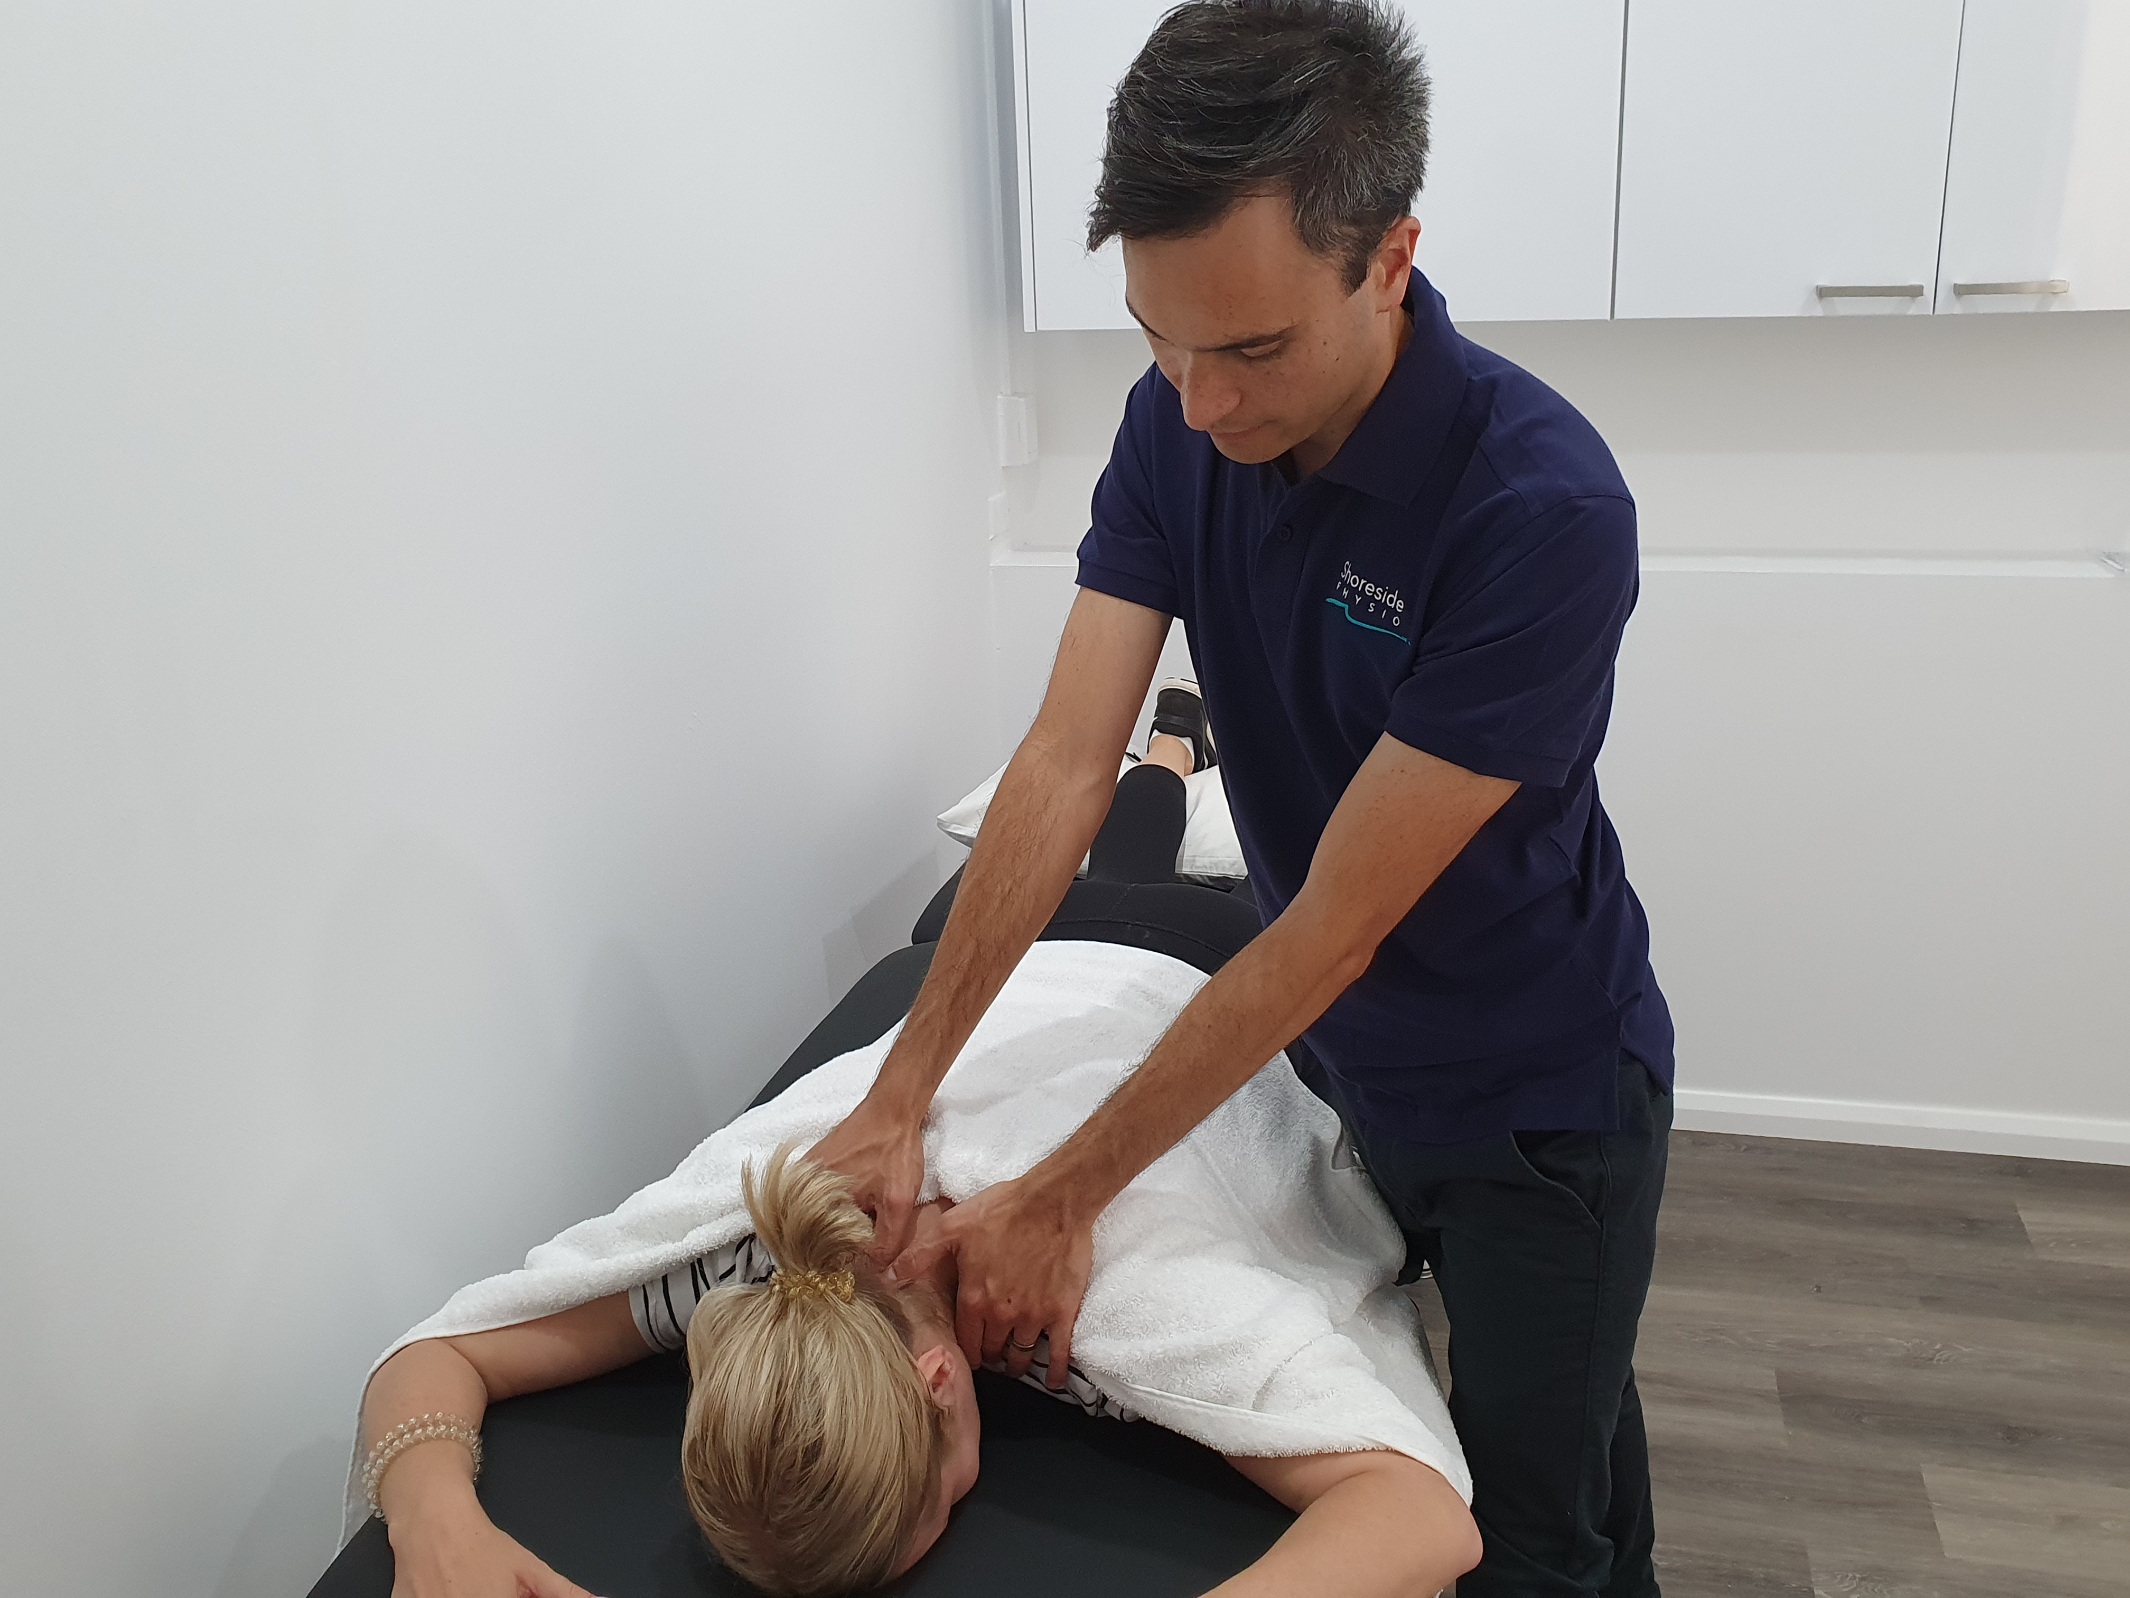 Frequently Asked Questions (FAQs)  About Physiotherapy at Shoreside Physio in Hallidays Point